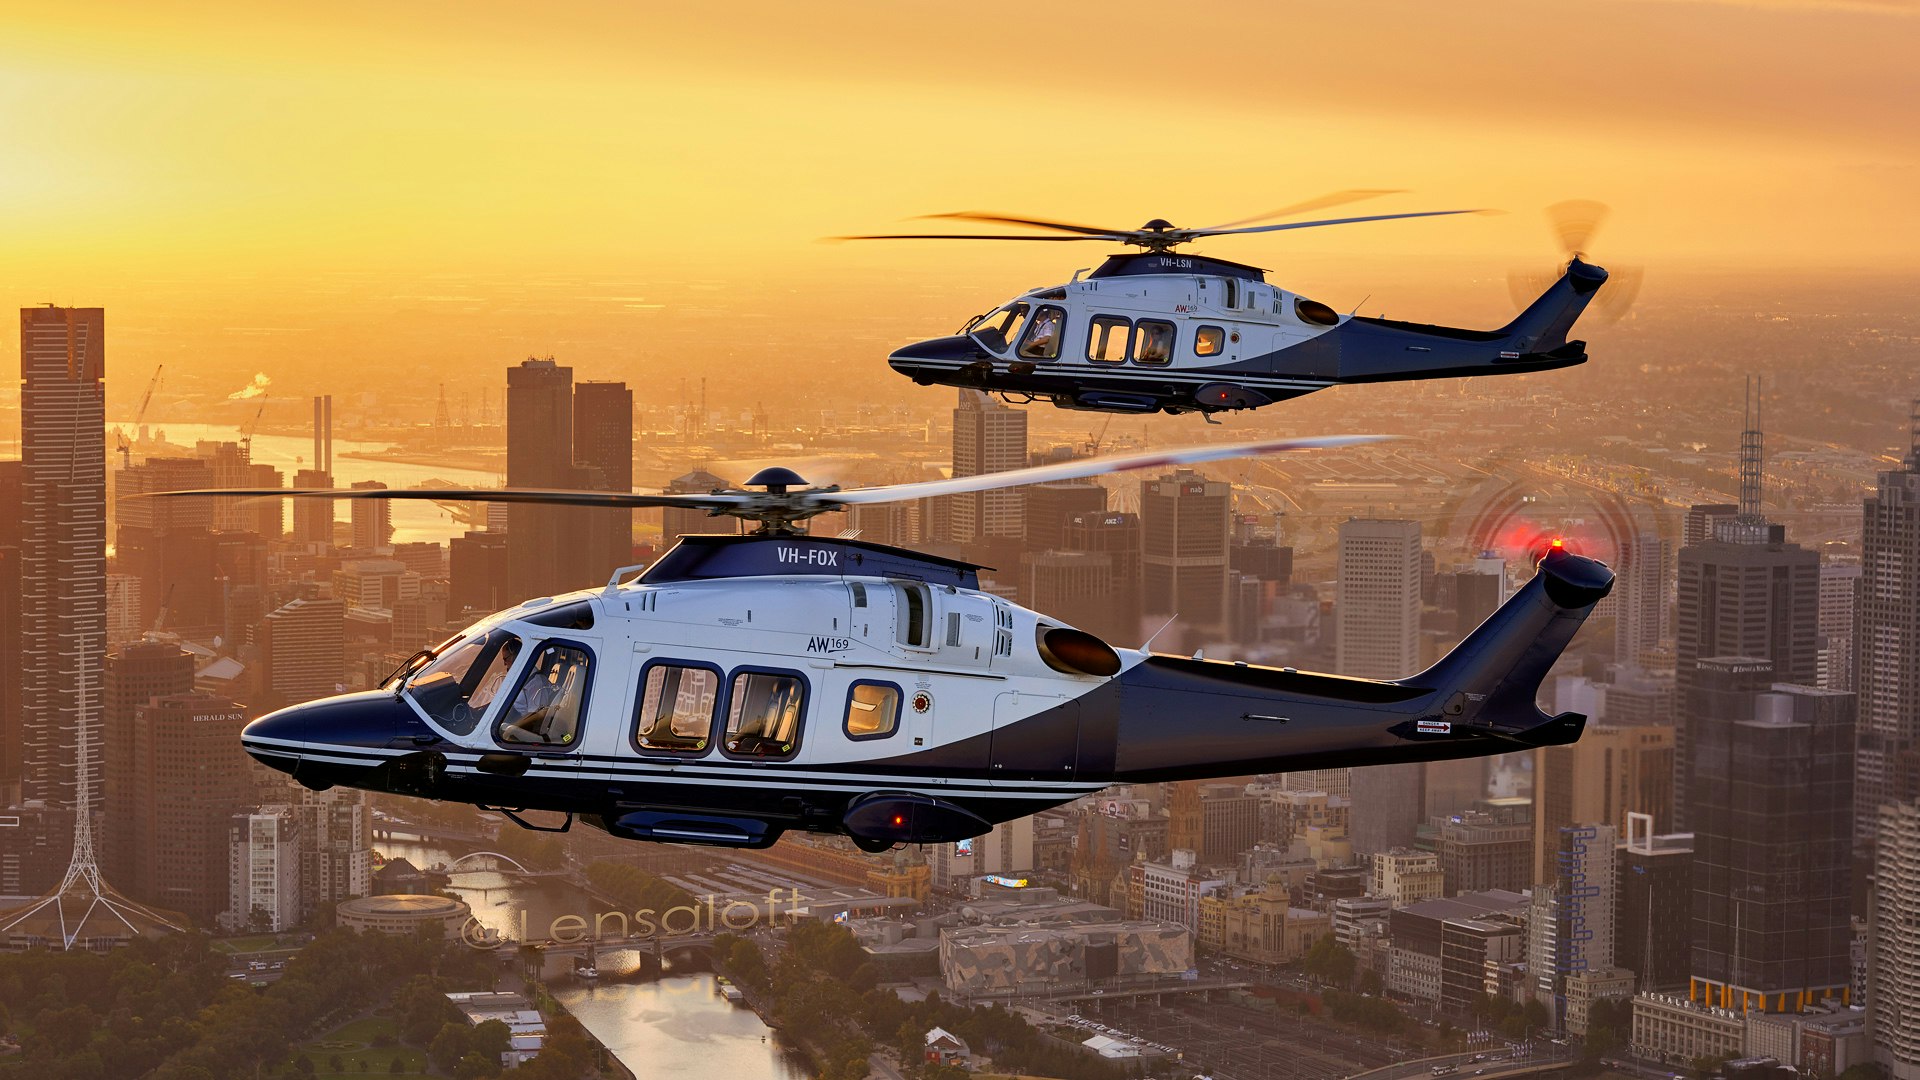 Helicopters flying over Melbourne, Australia.